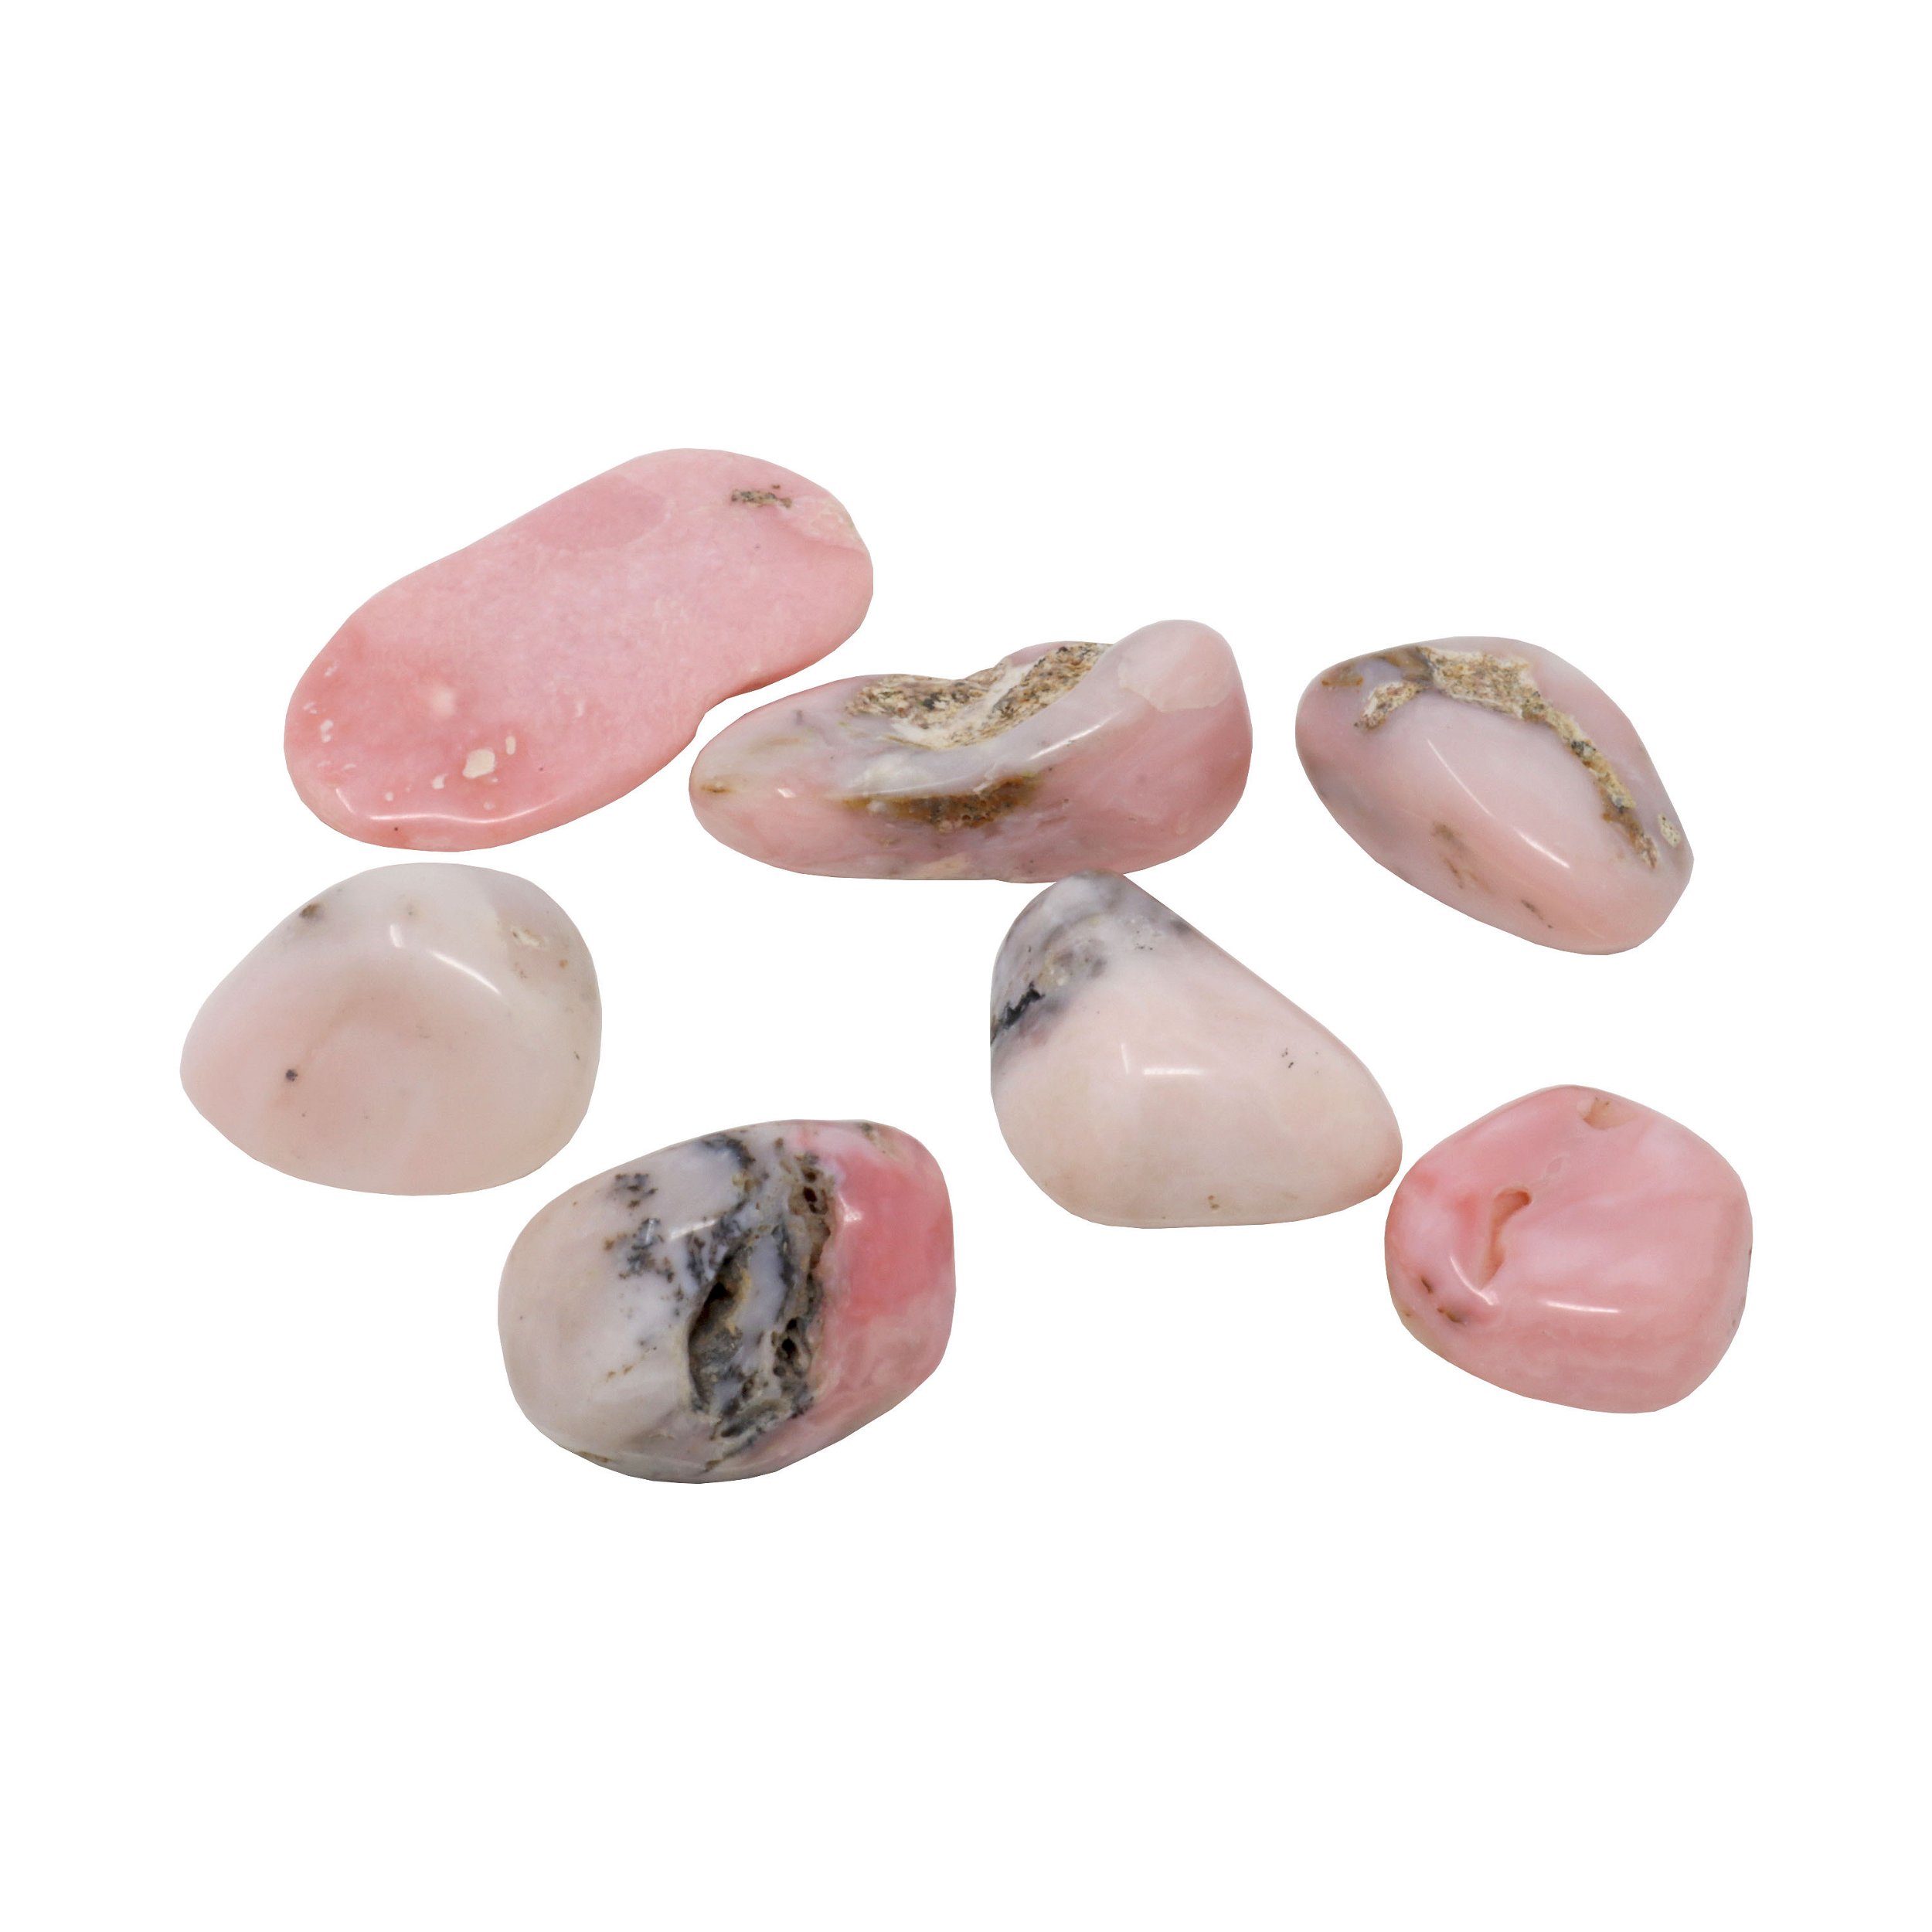 Tumbled Common Pink Opal From Peru - Large (Singles)